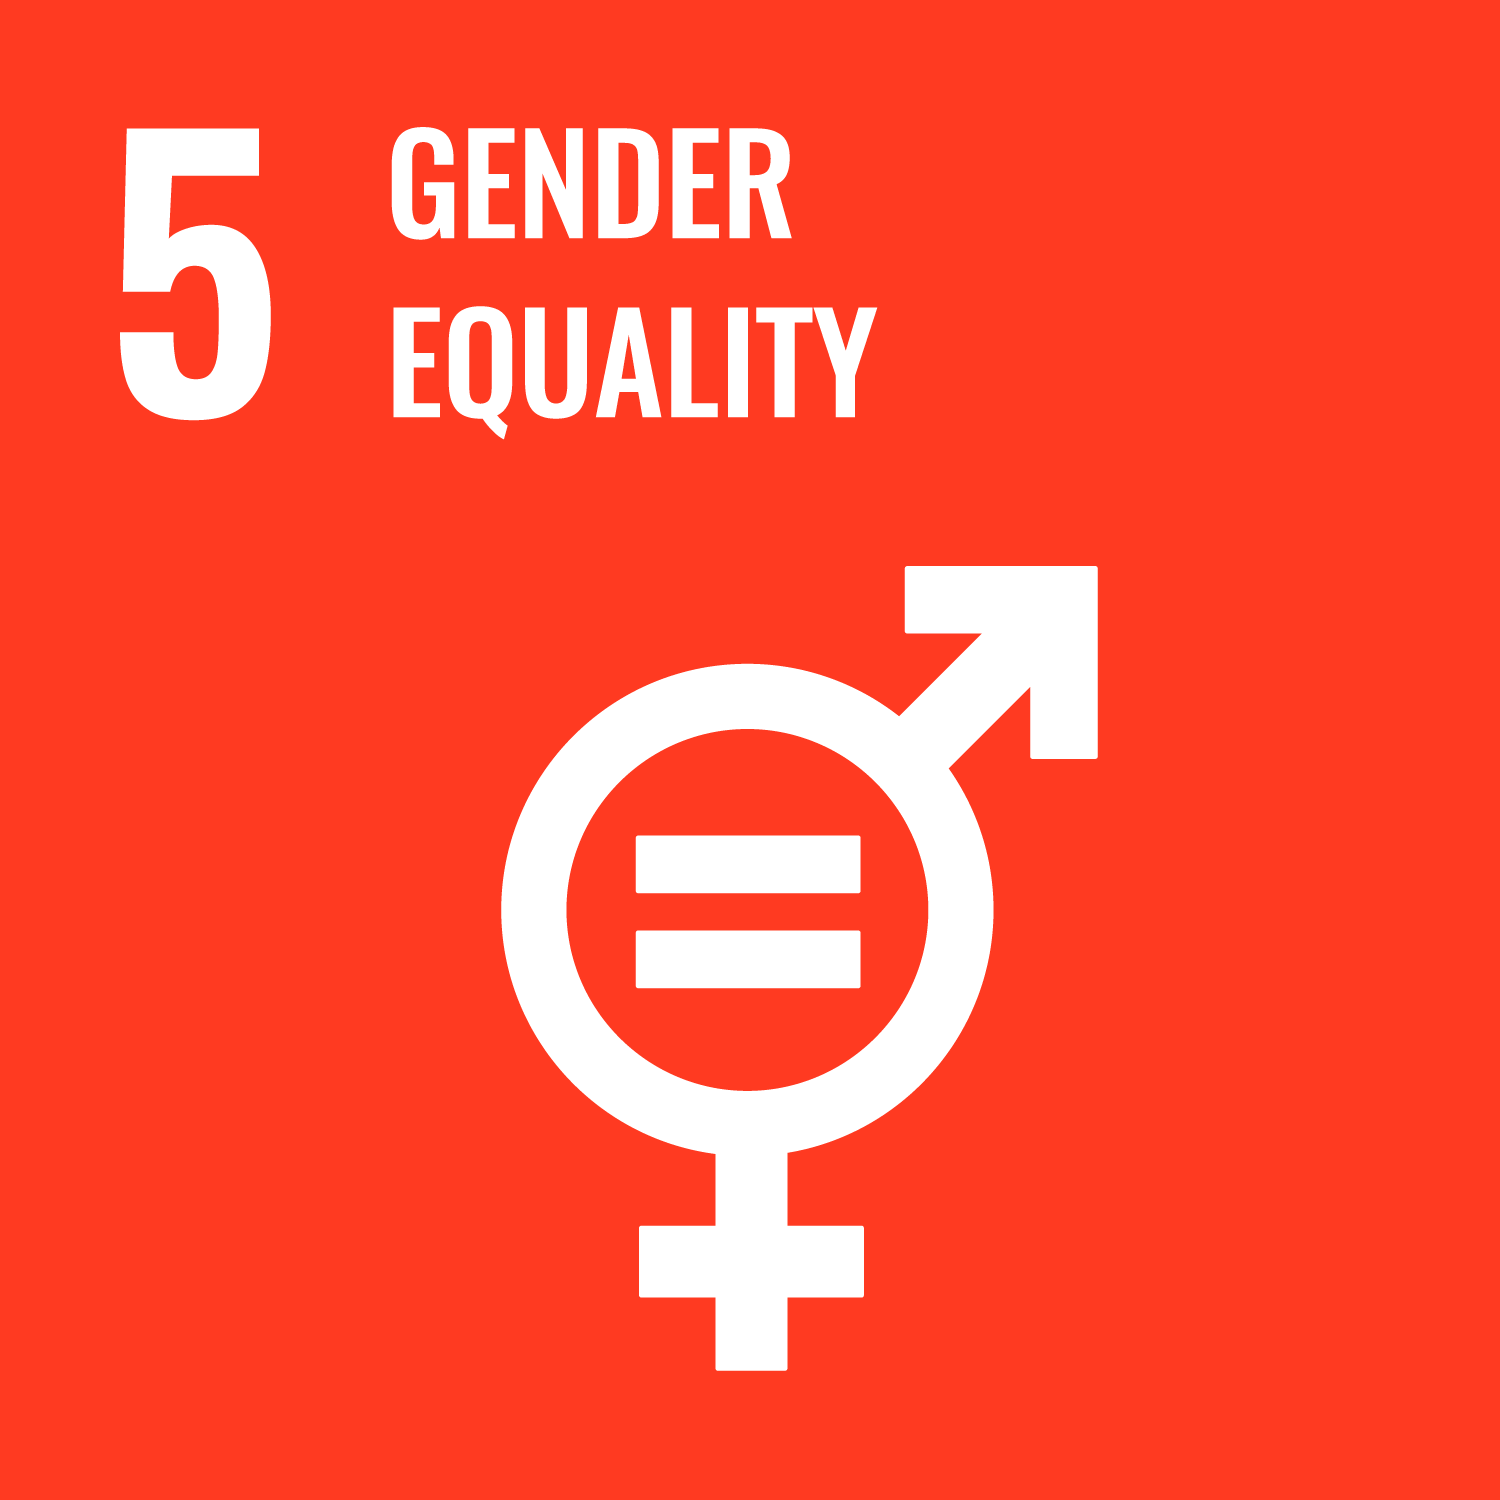 United Nations Sustainable Development Goal 5: Gender equality